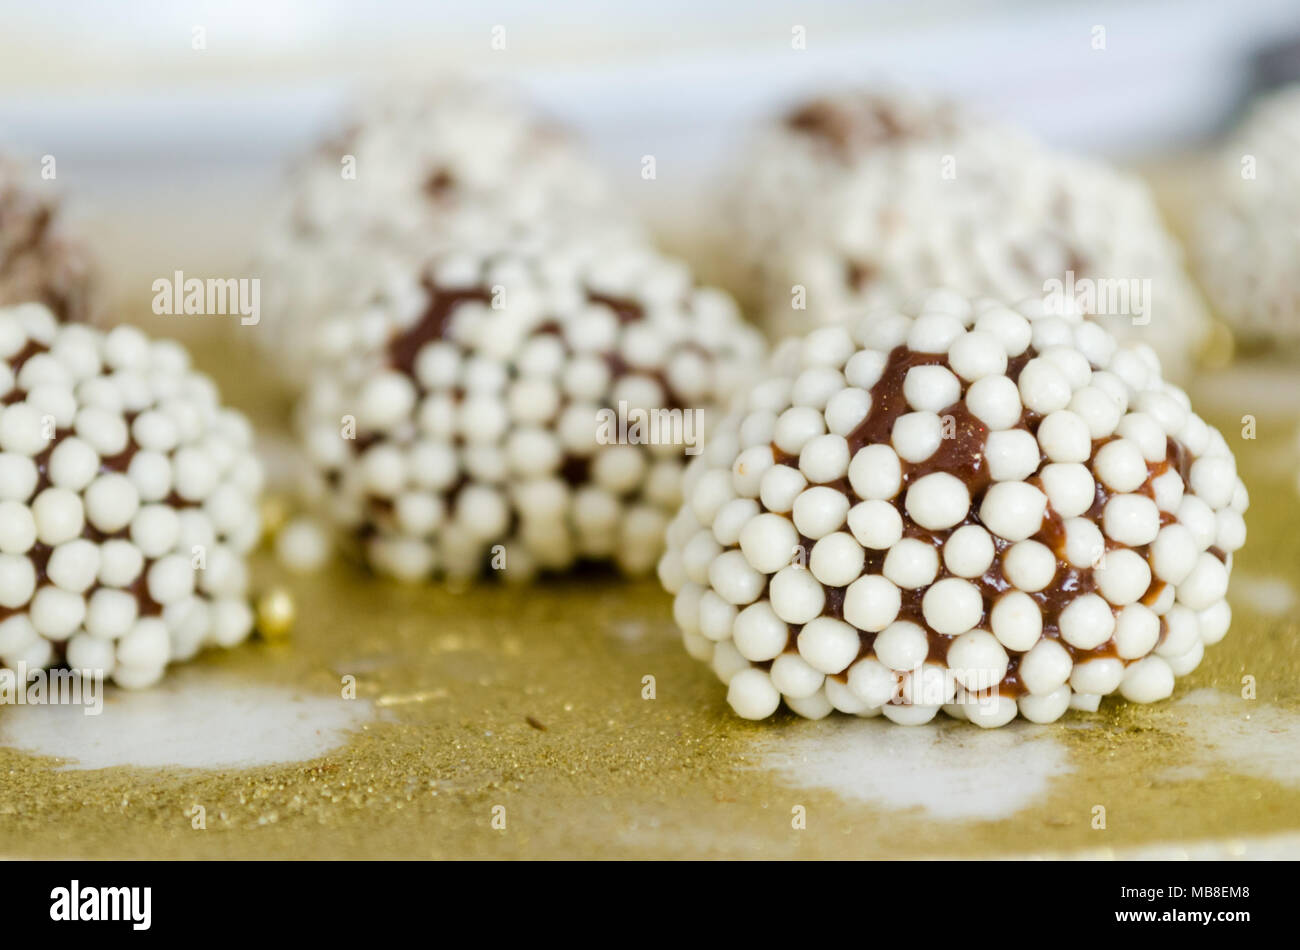 Brigadiers granulated with crunchy white balls on golden tray. Stock Photo